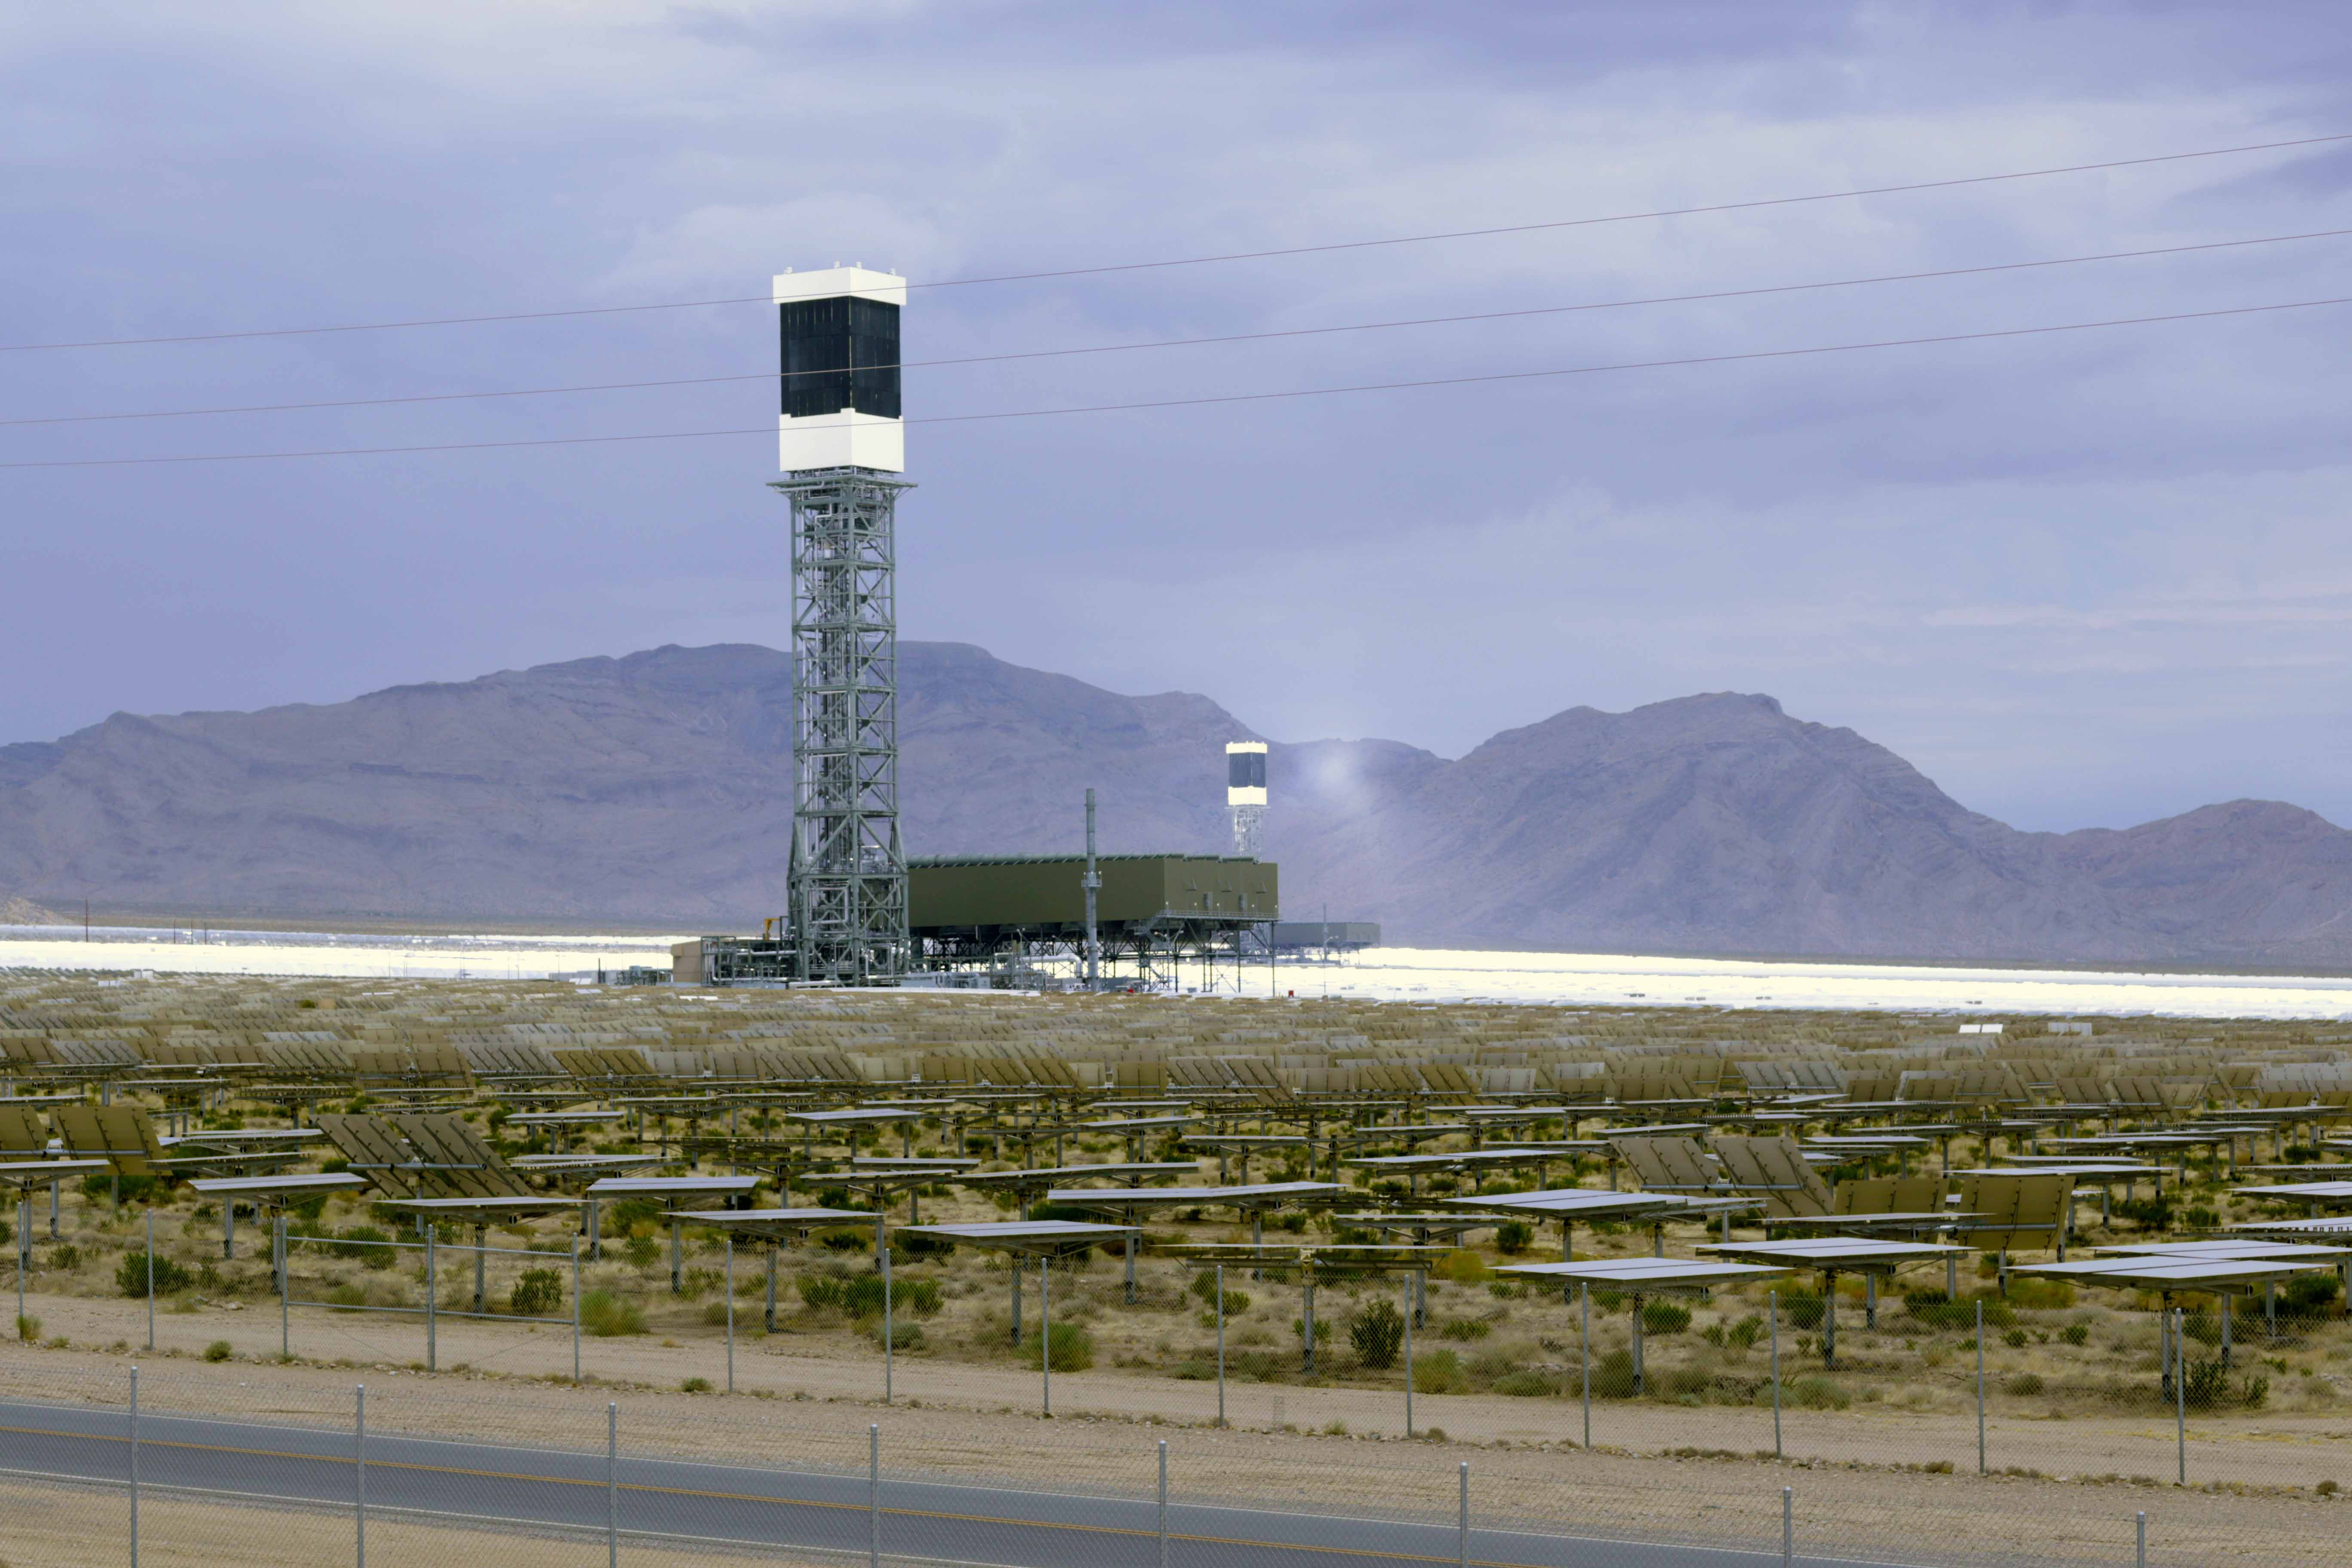 Two of the 3 Ivanpah units, with the far unit being illuminated by the 